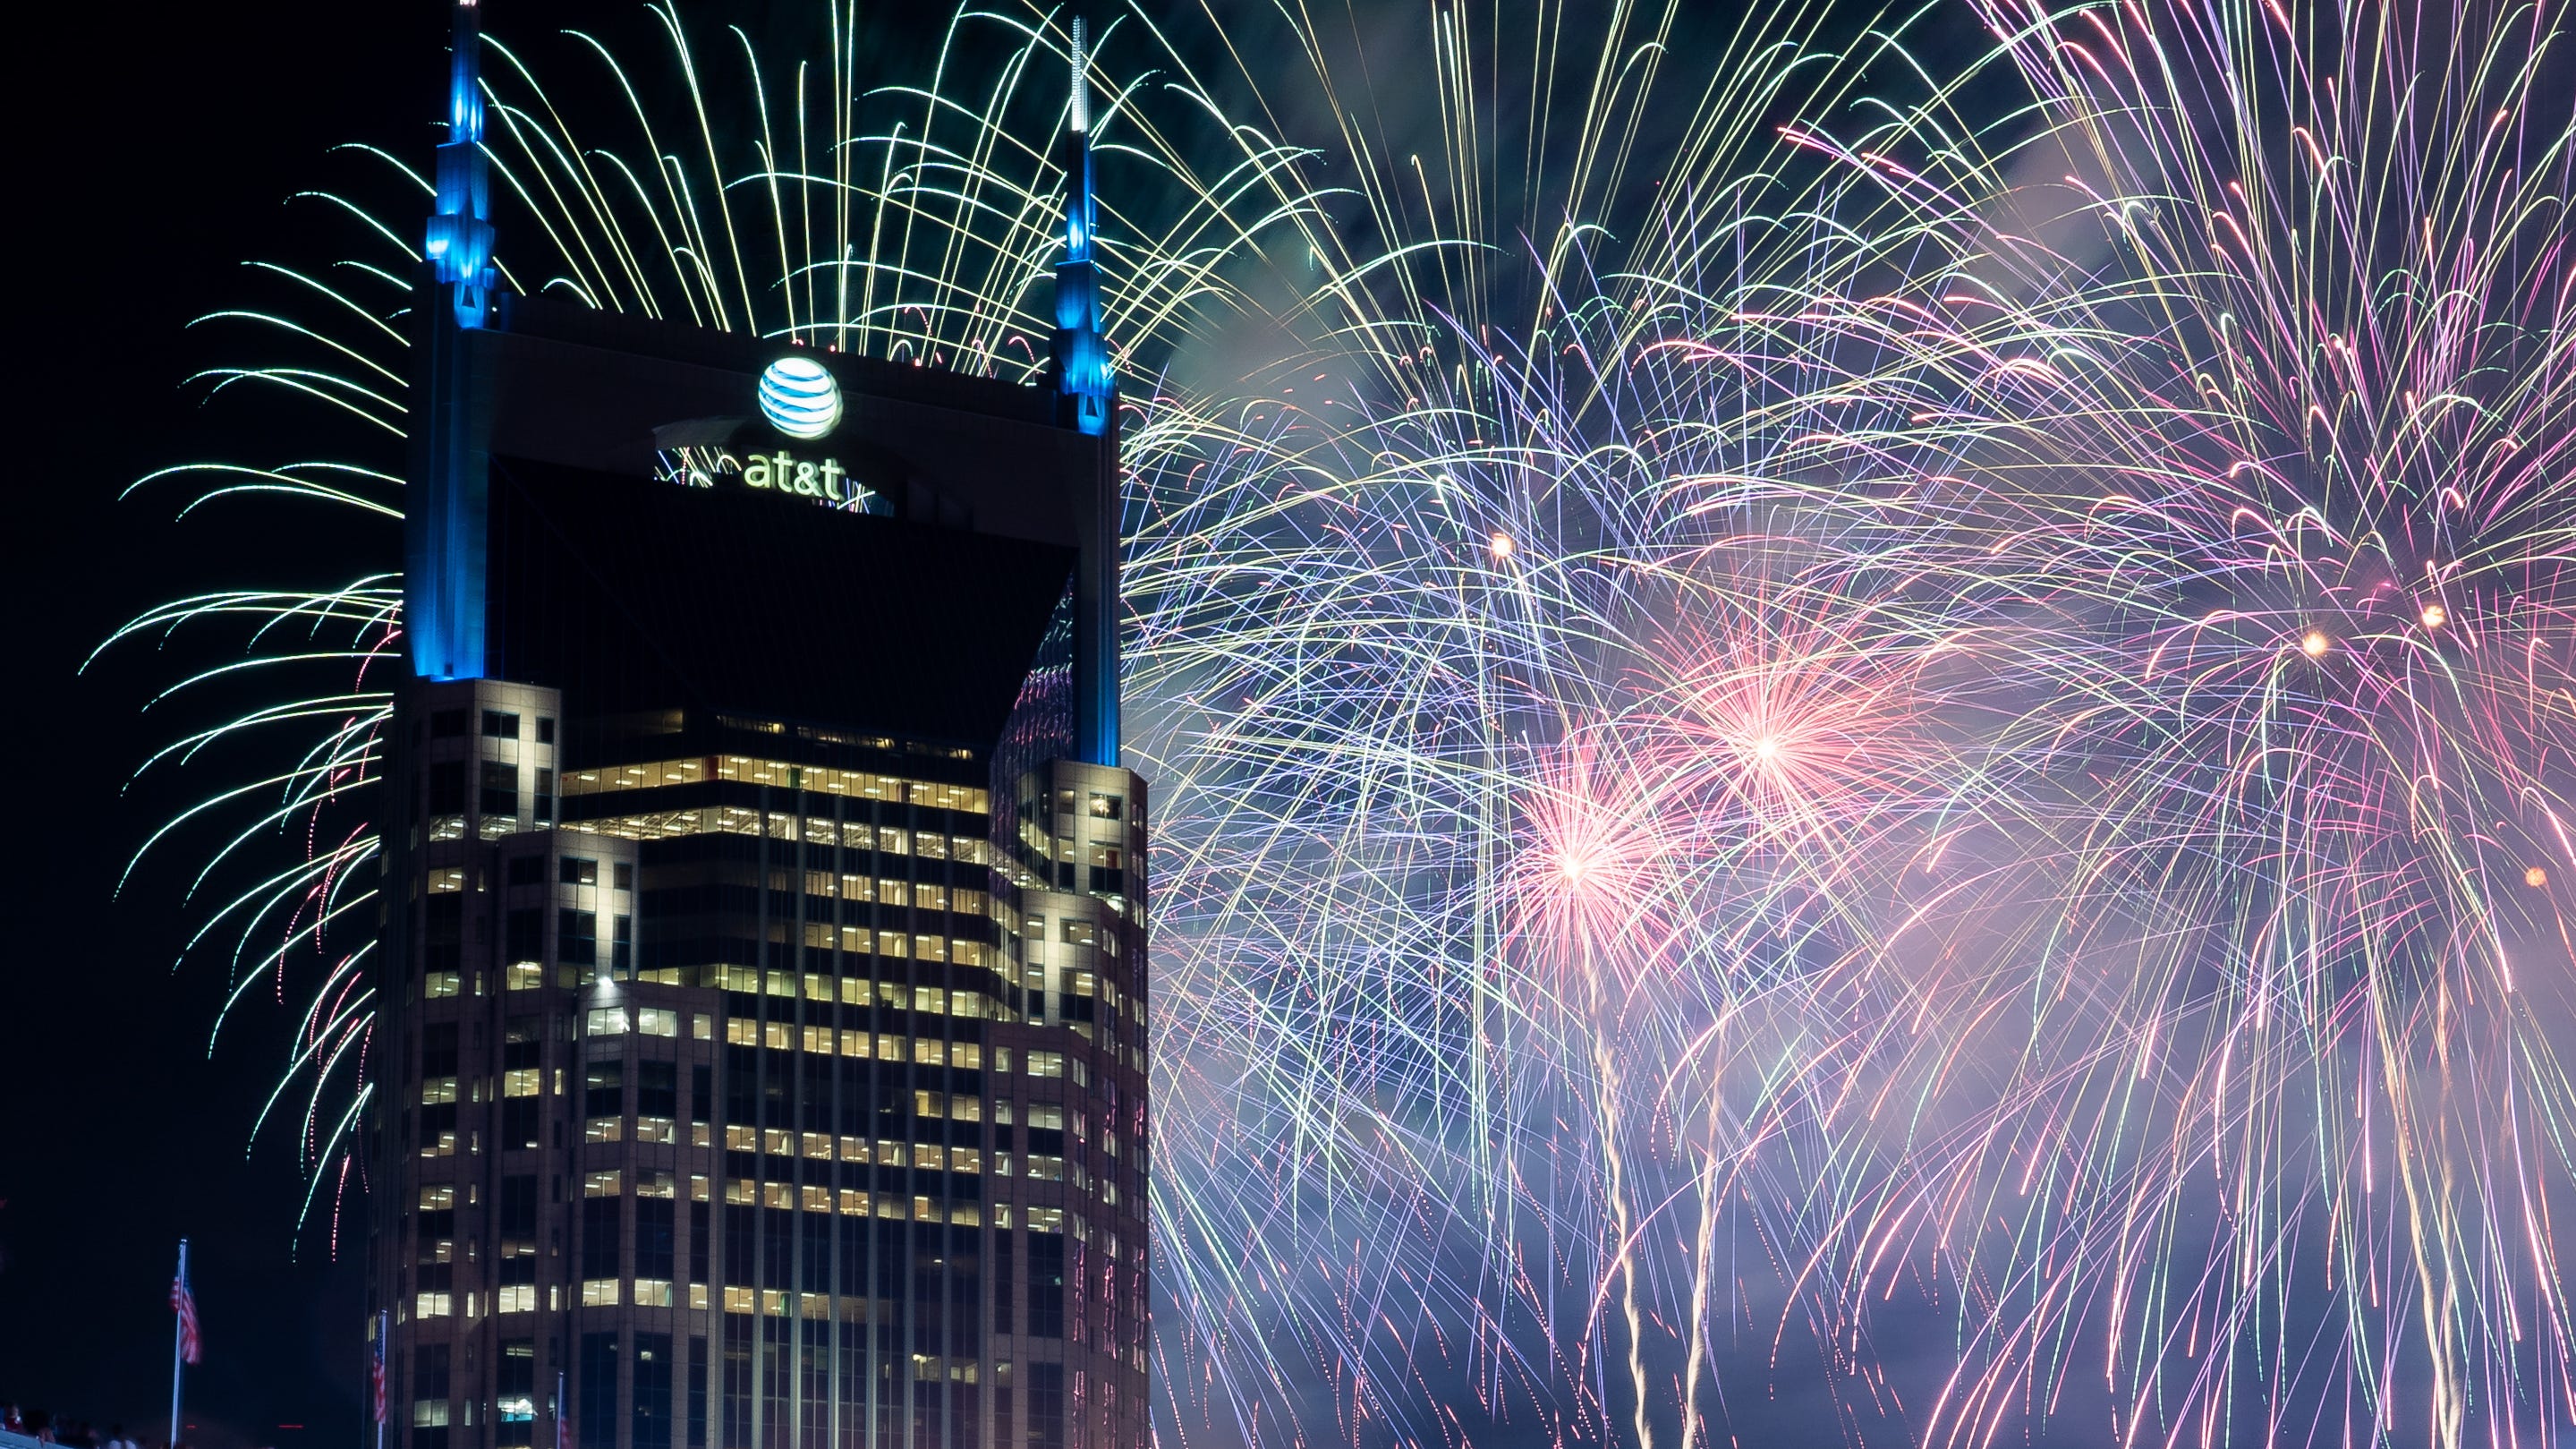 What to know about Nashville's downtown 4th of July bash